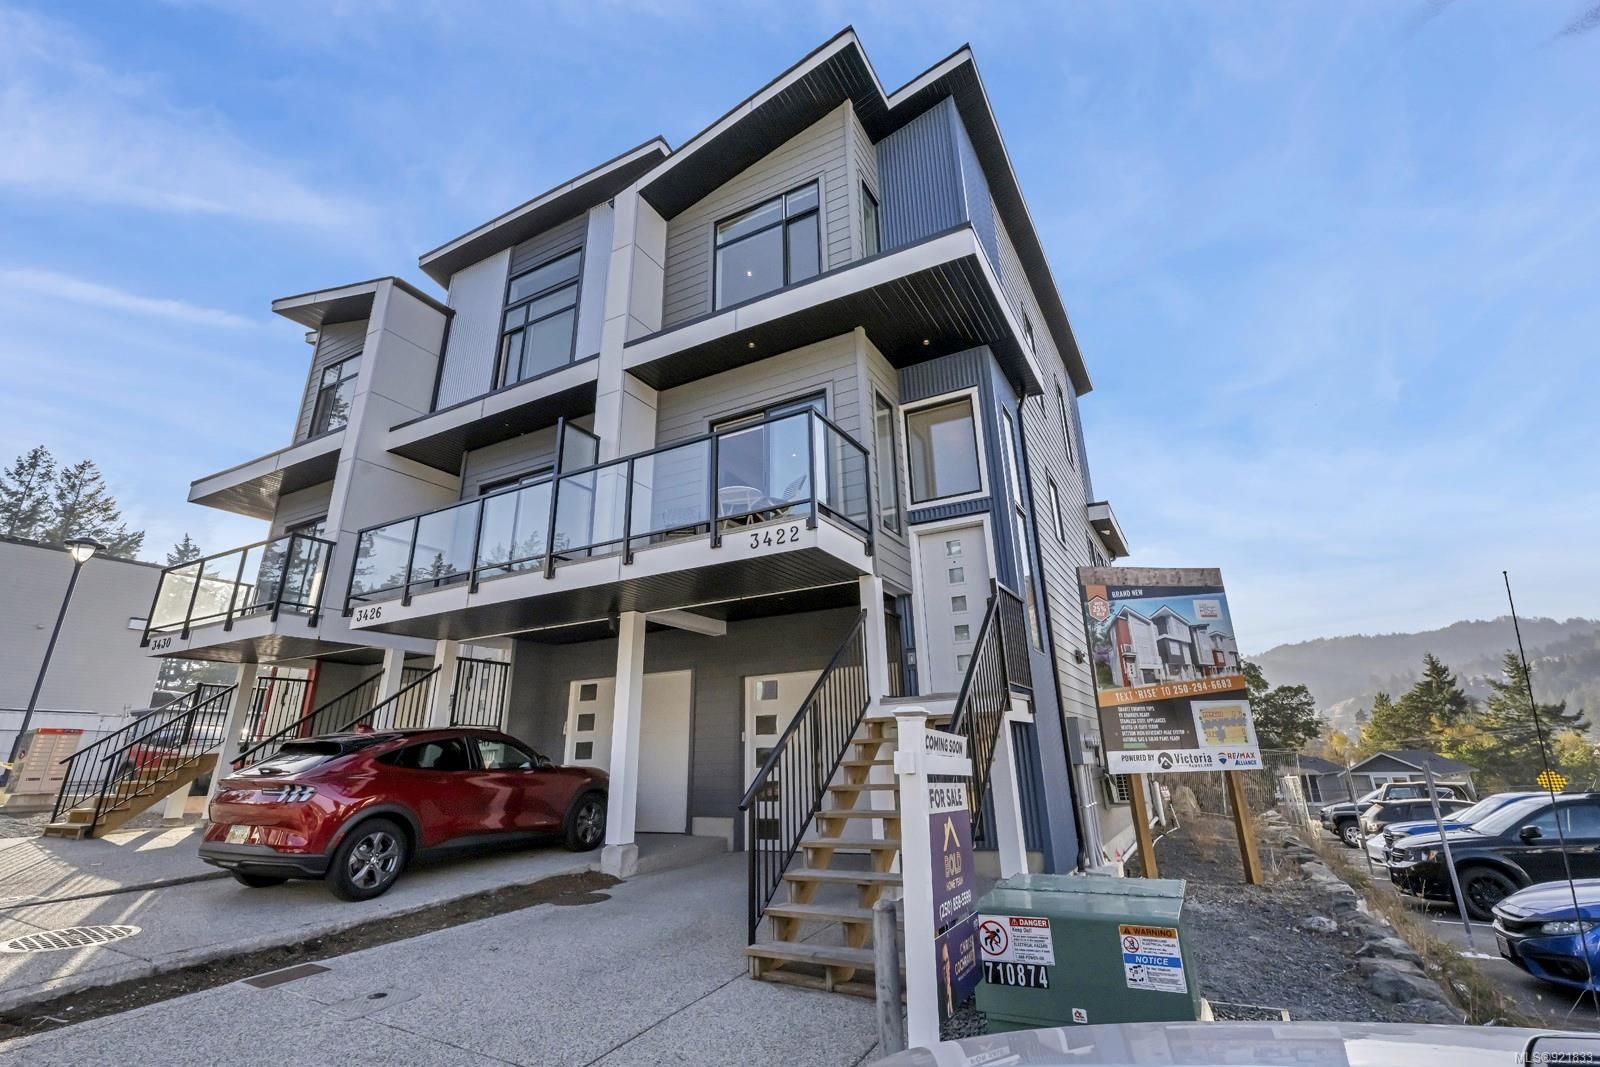 Main Photo: 3422 Vision Way in Langford: La Happy Valley Row/Townhouse for sale : MLS®# 921833